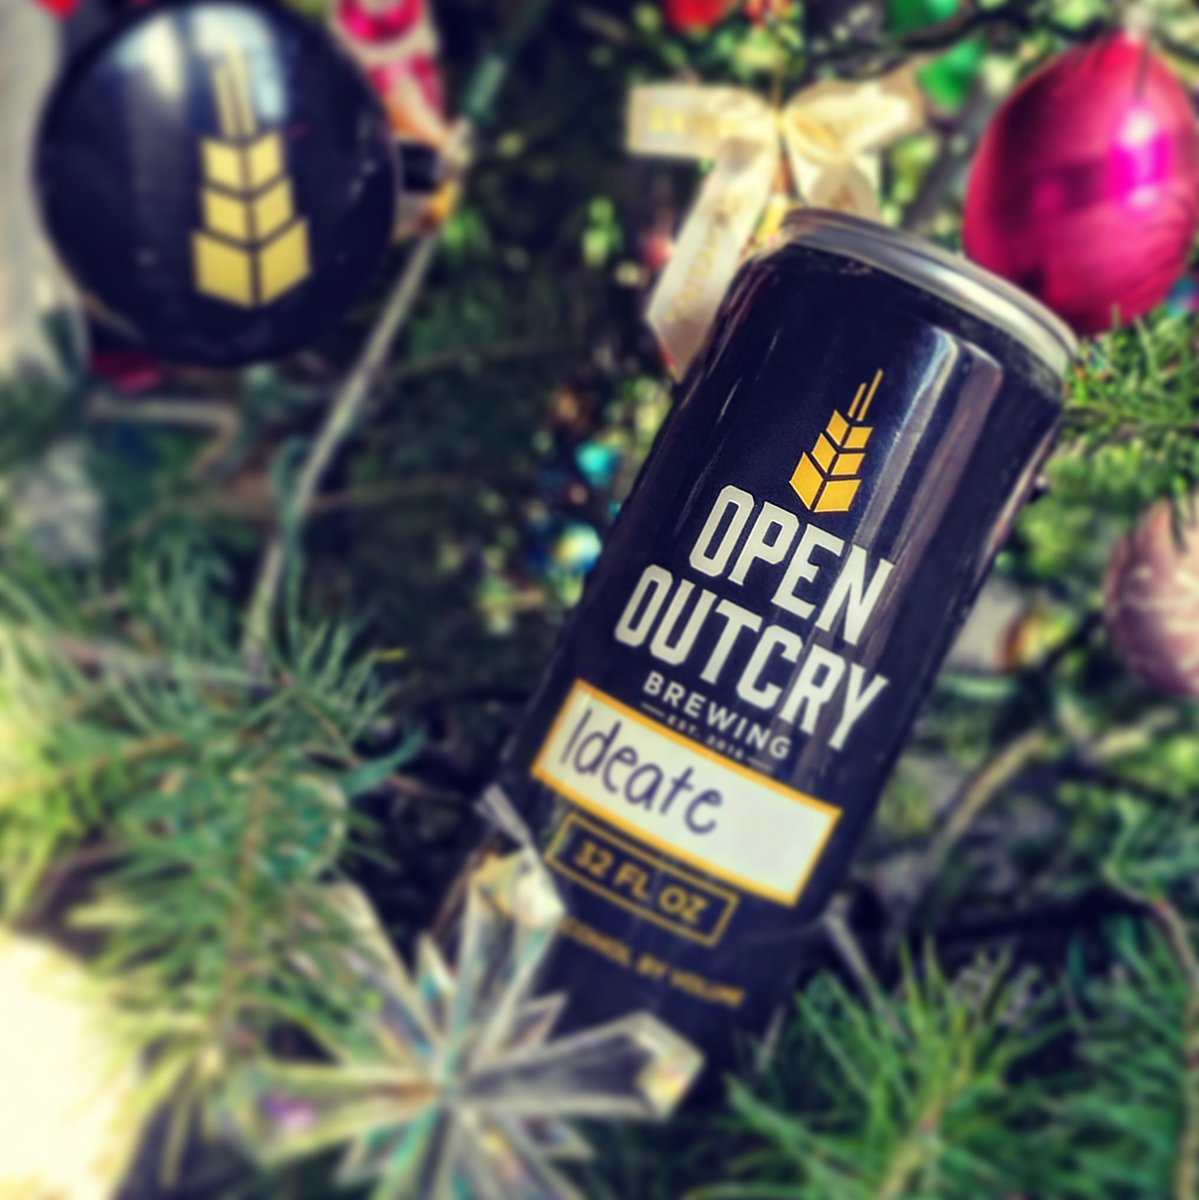 'Every time a #crowler pours, an angle gets his wings.'

#OpenOutcryBrewing #Crowlers #ChicagoBeer #ItsAWonderfulLife